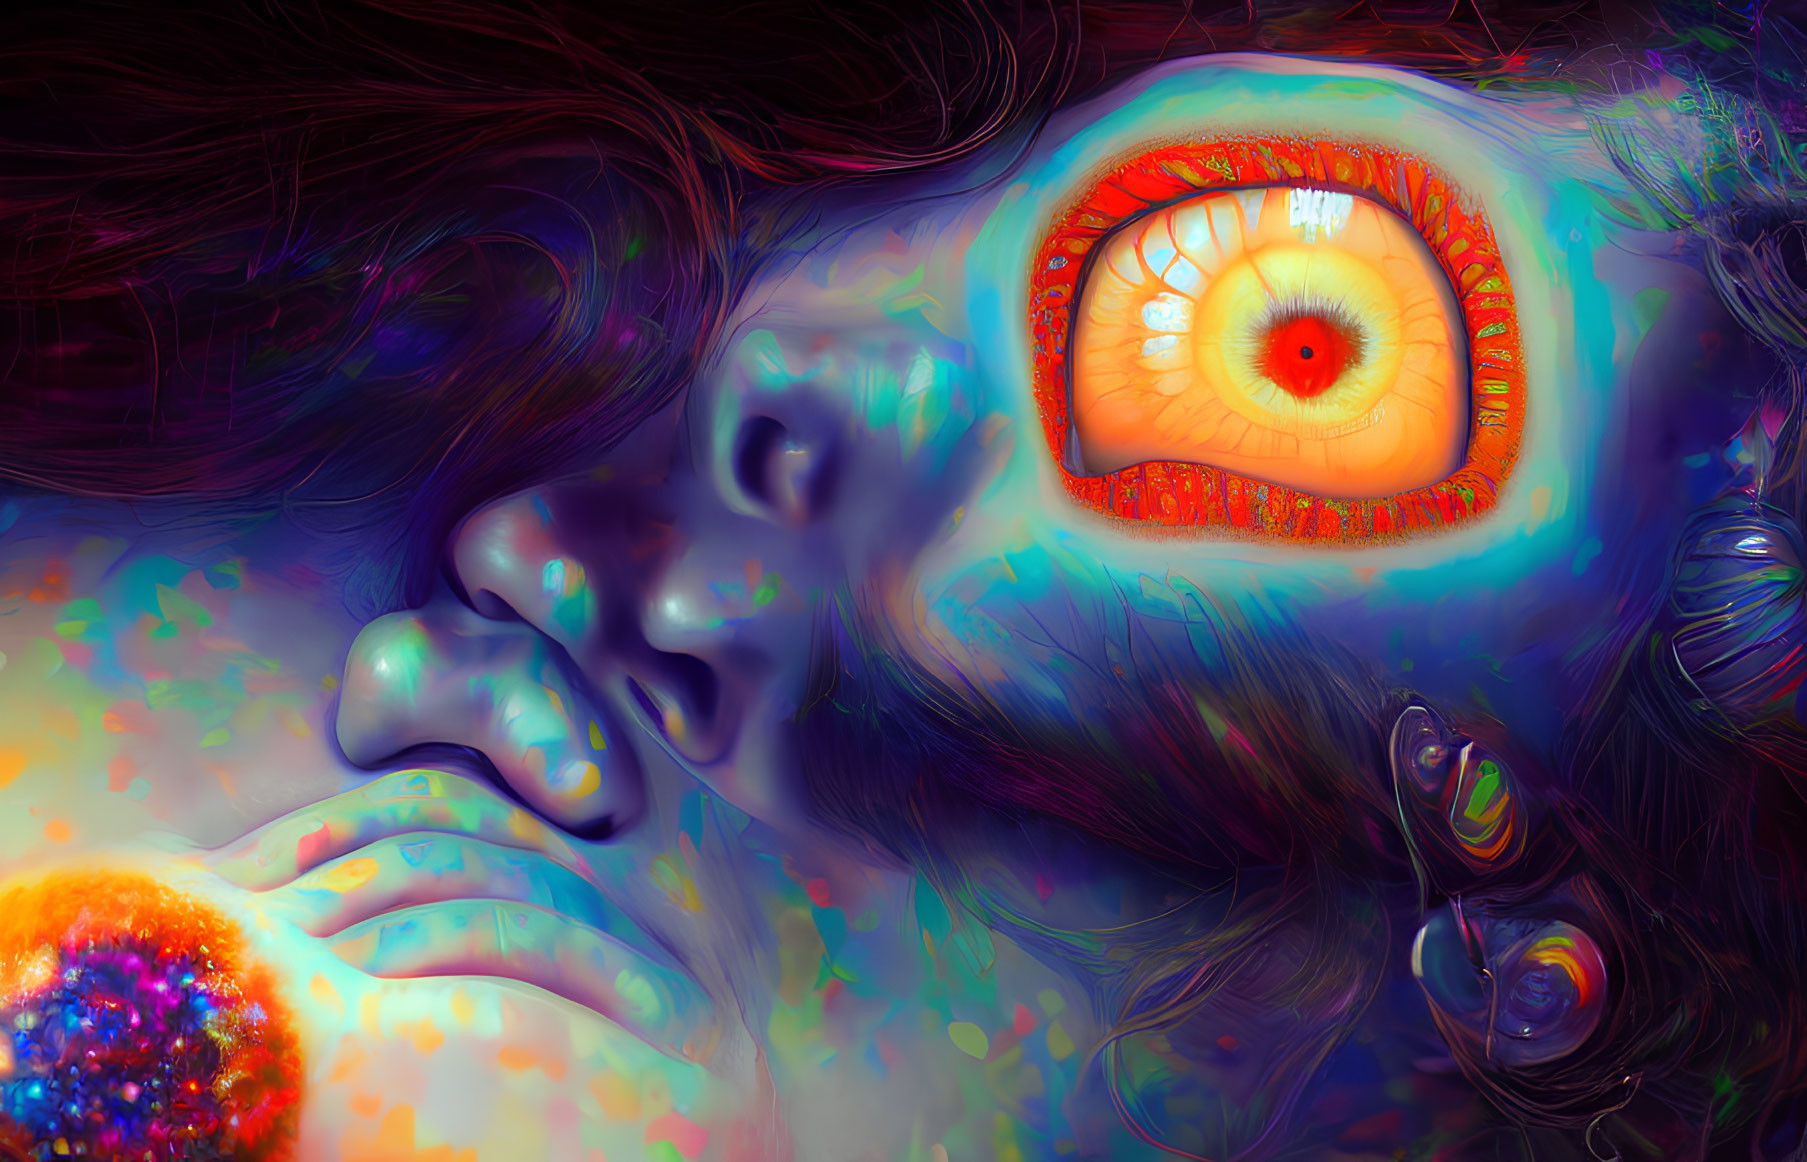 Colorful Digital Artwork: Close-Up Face with Glowing Orange Eye and Orb